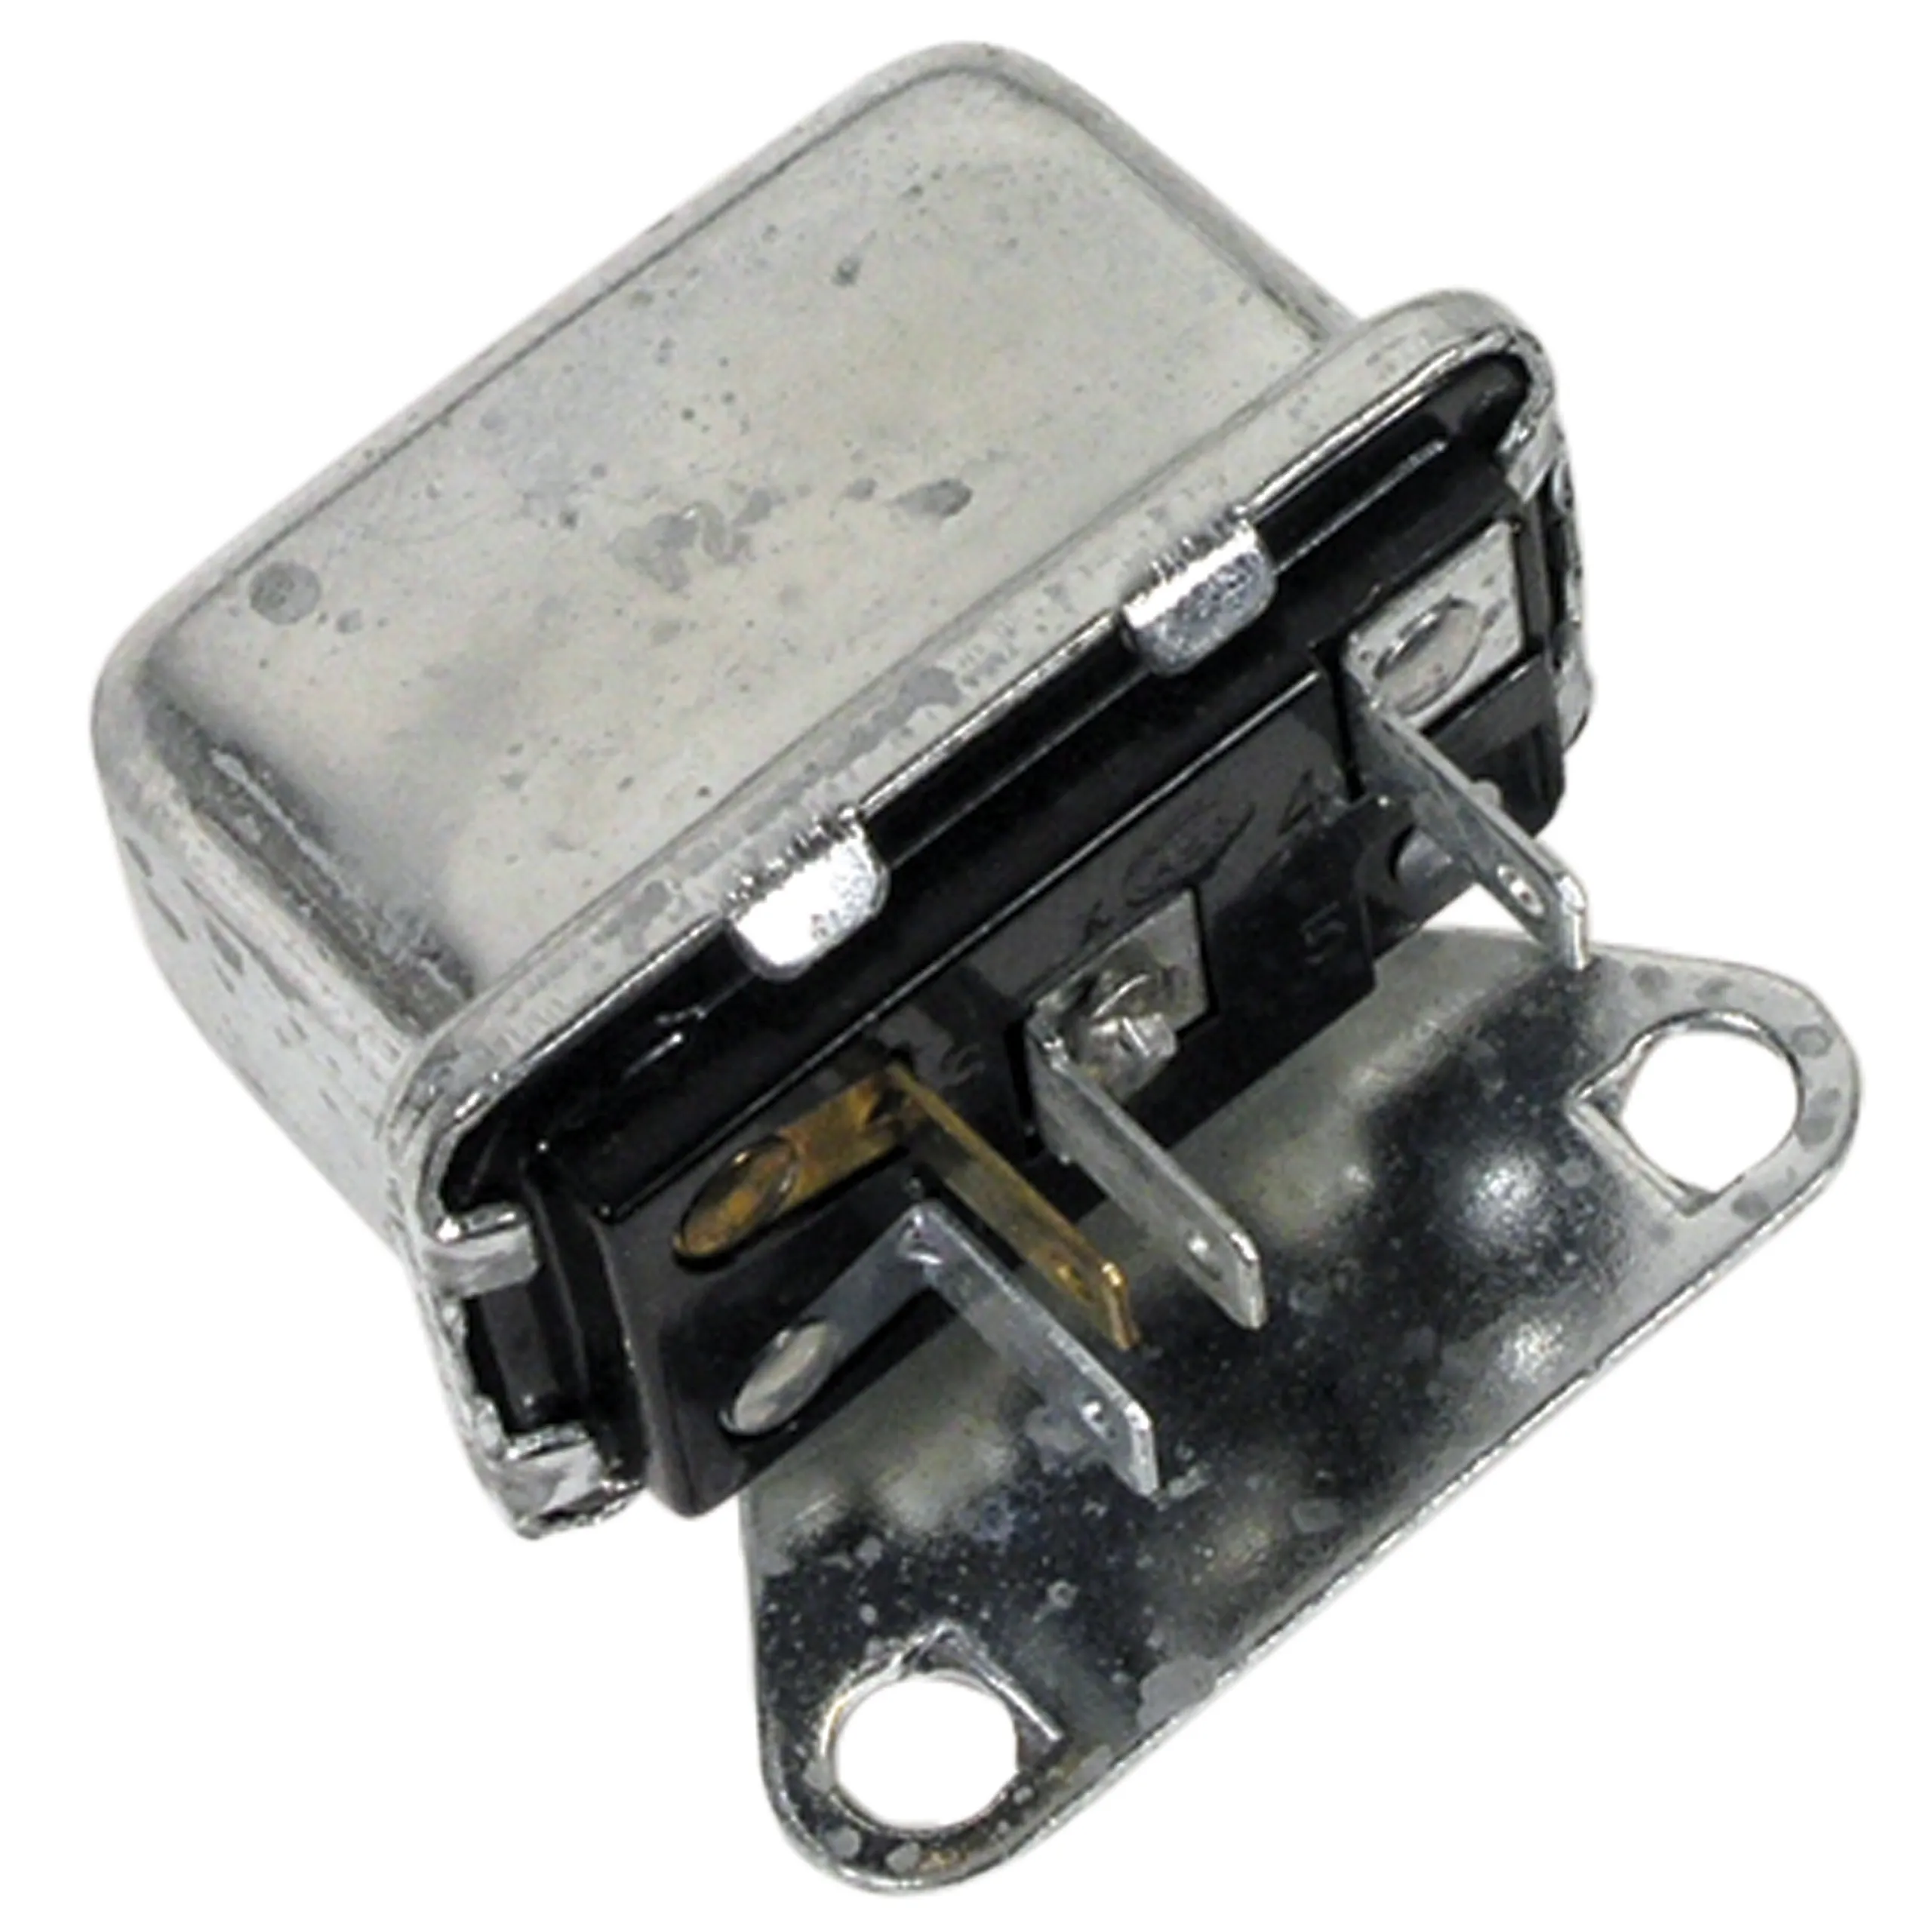 1963-1968 Chevrolet Corvette Air Conditioning Relay. Replacement - Lectric Limited, Inc.